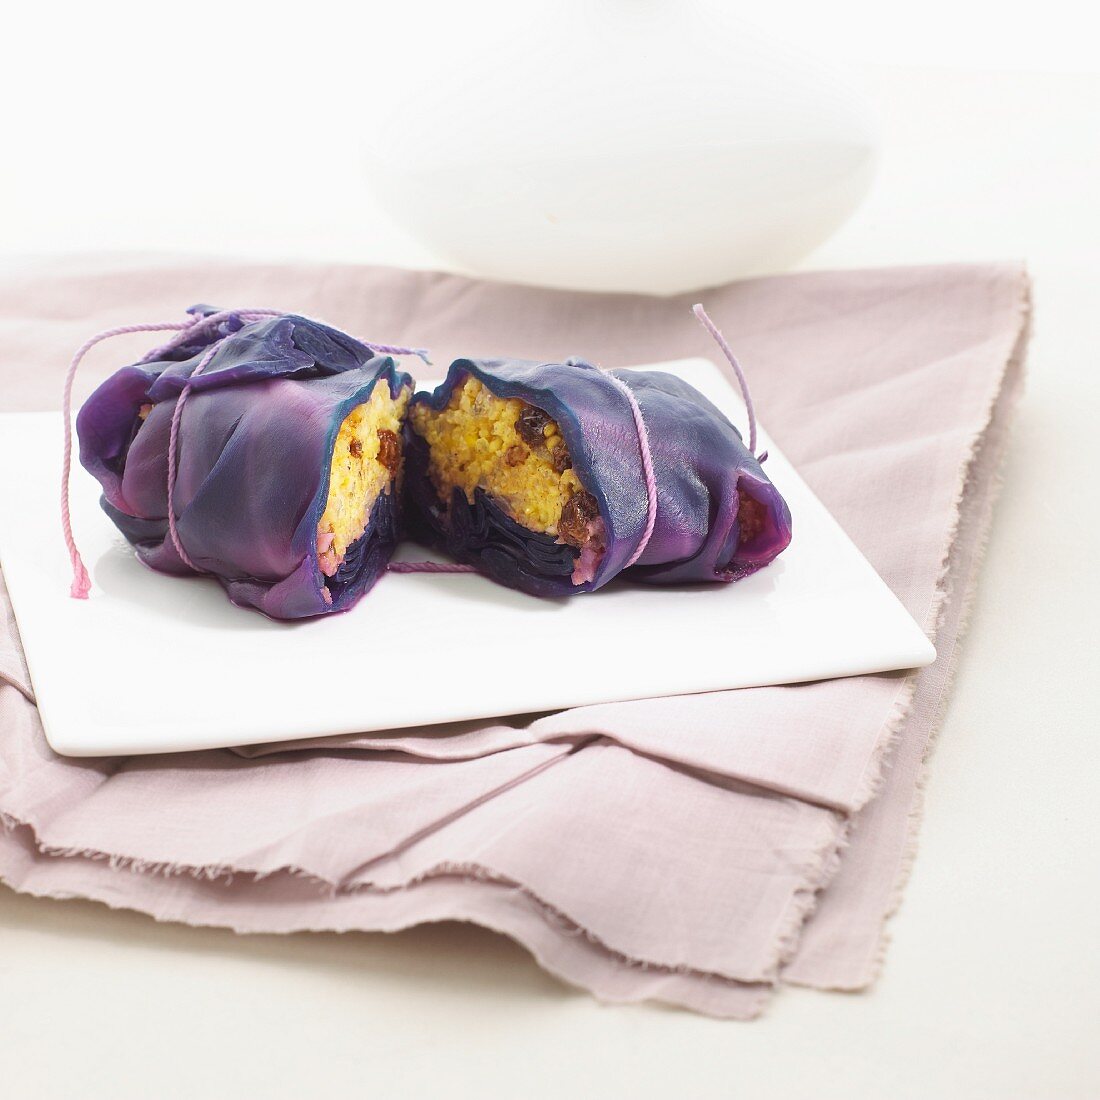 Red cabbage parcels filled with millet